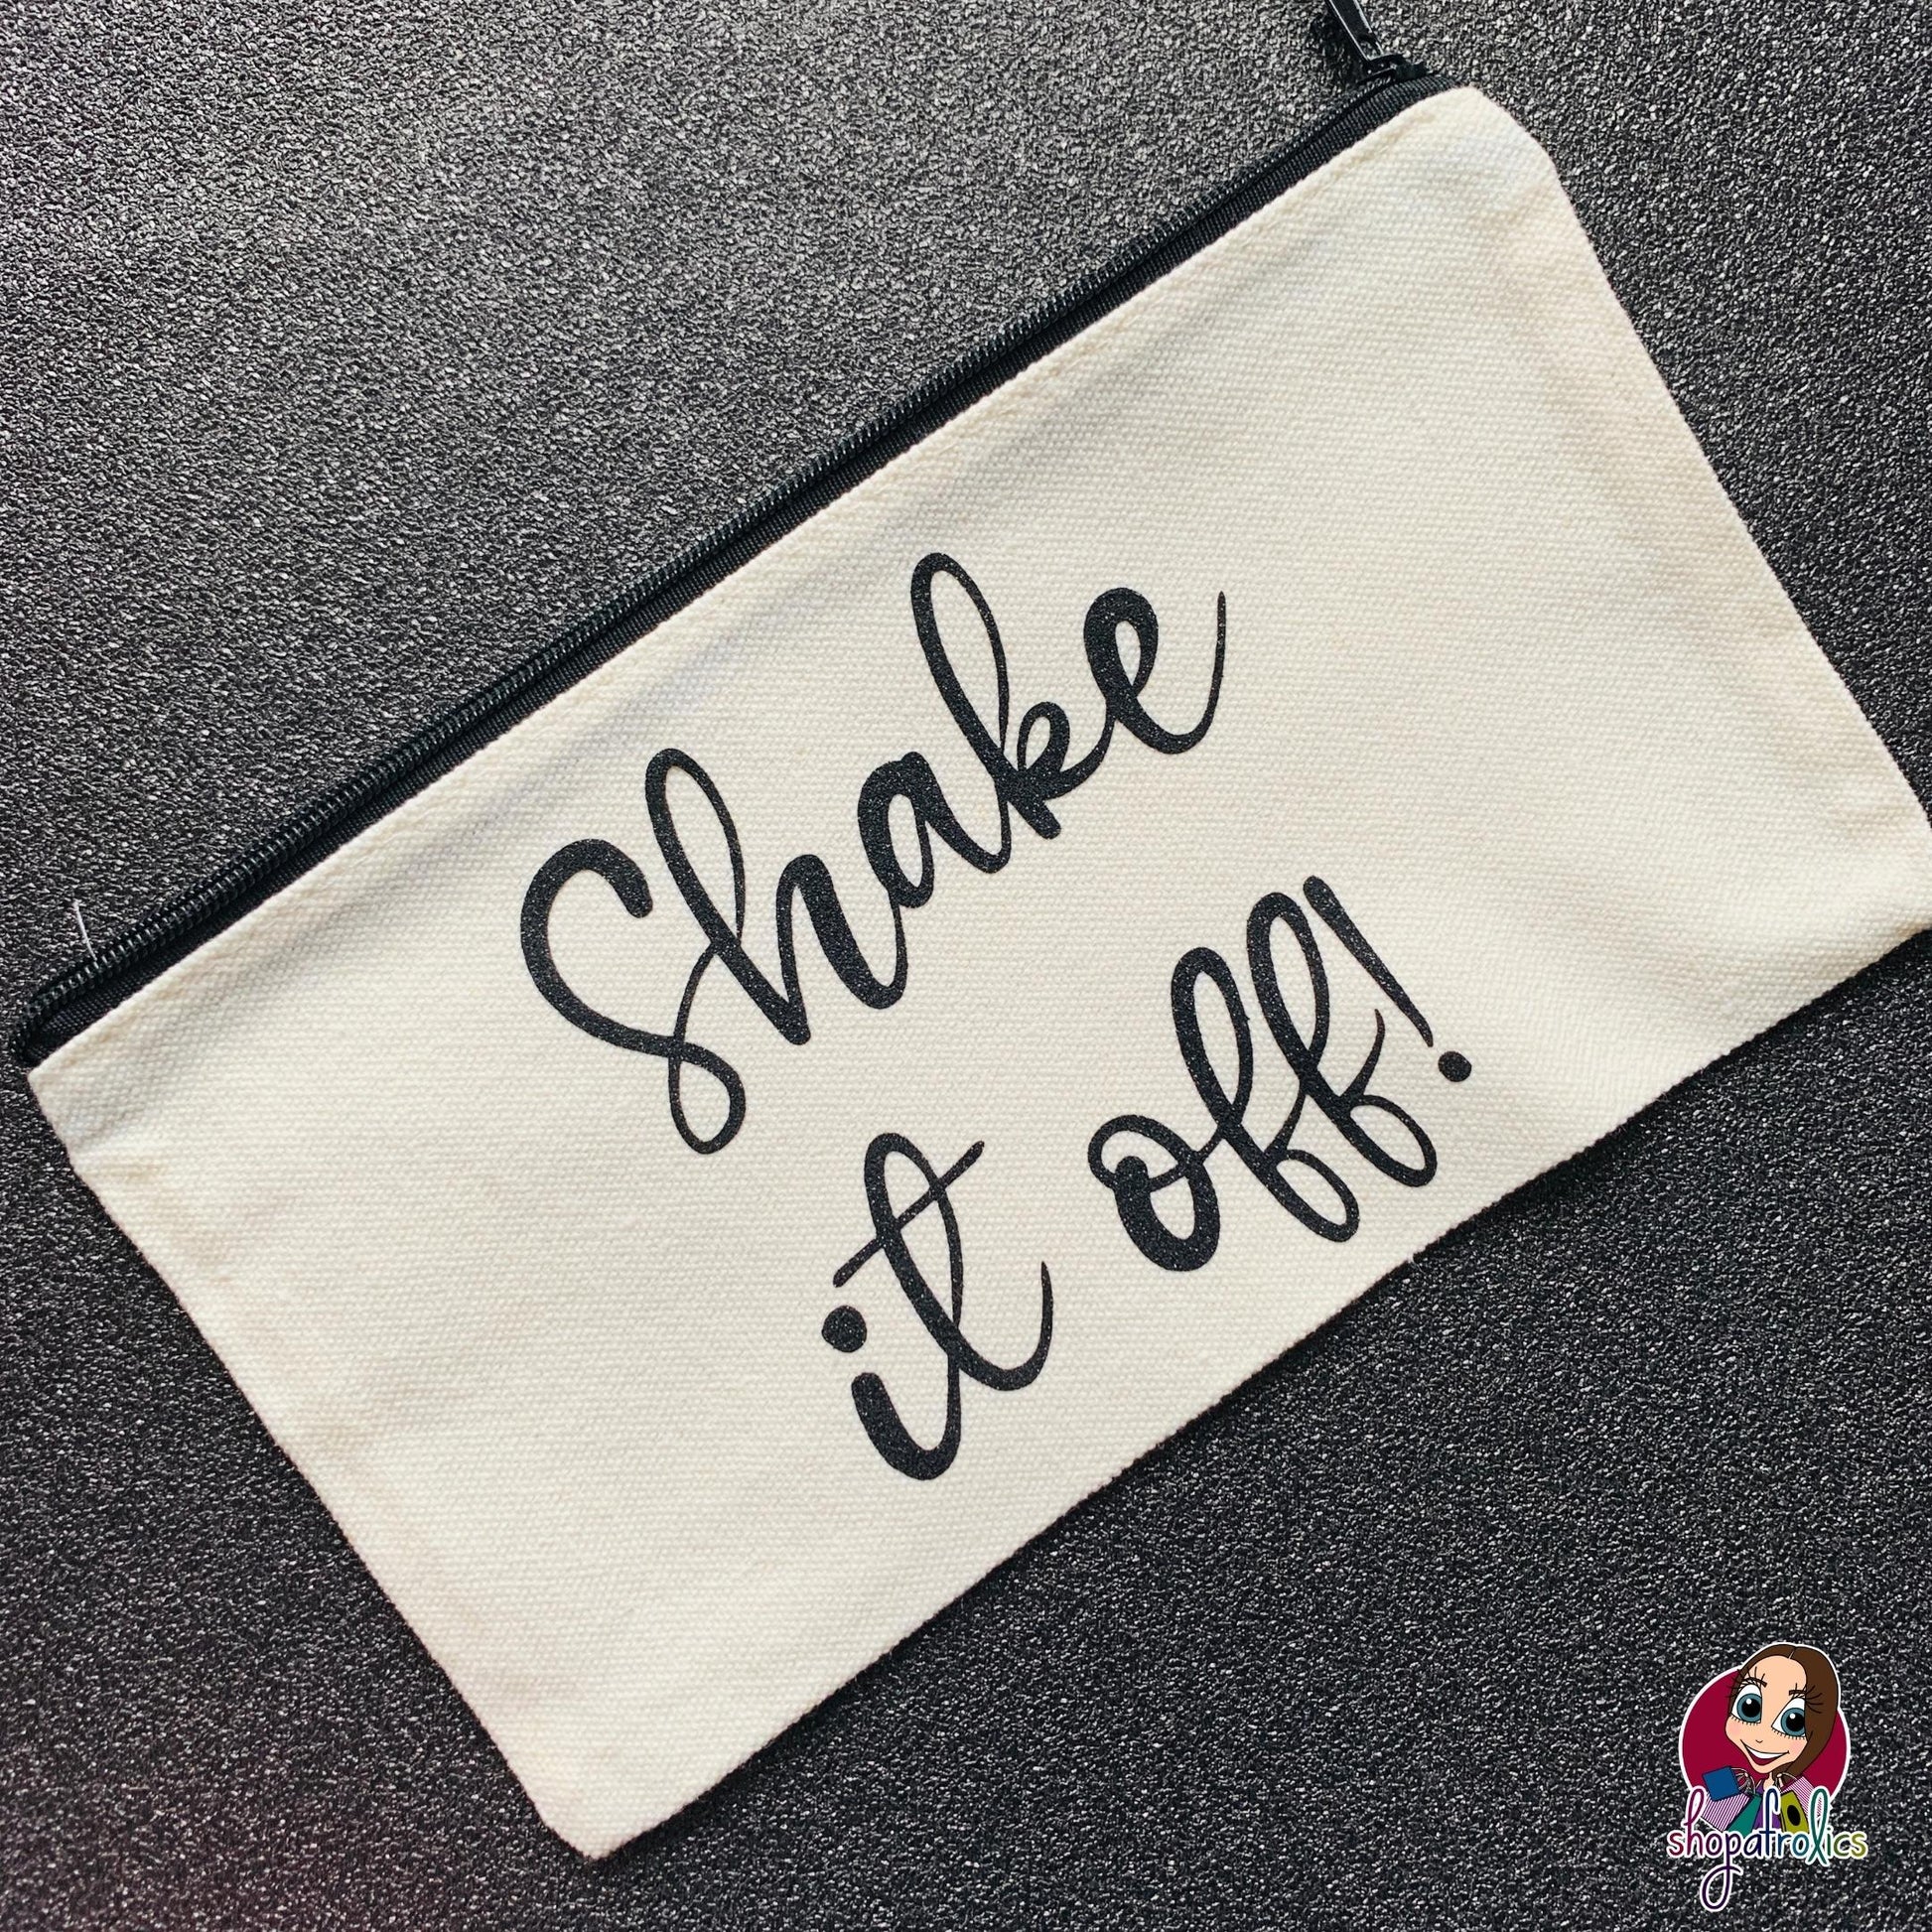 Shake it off! Taylor Swift inspired cosmetic bag